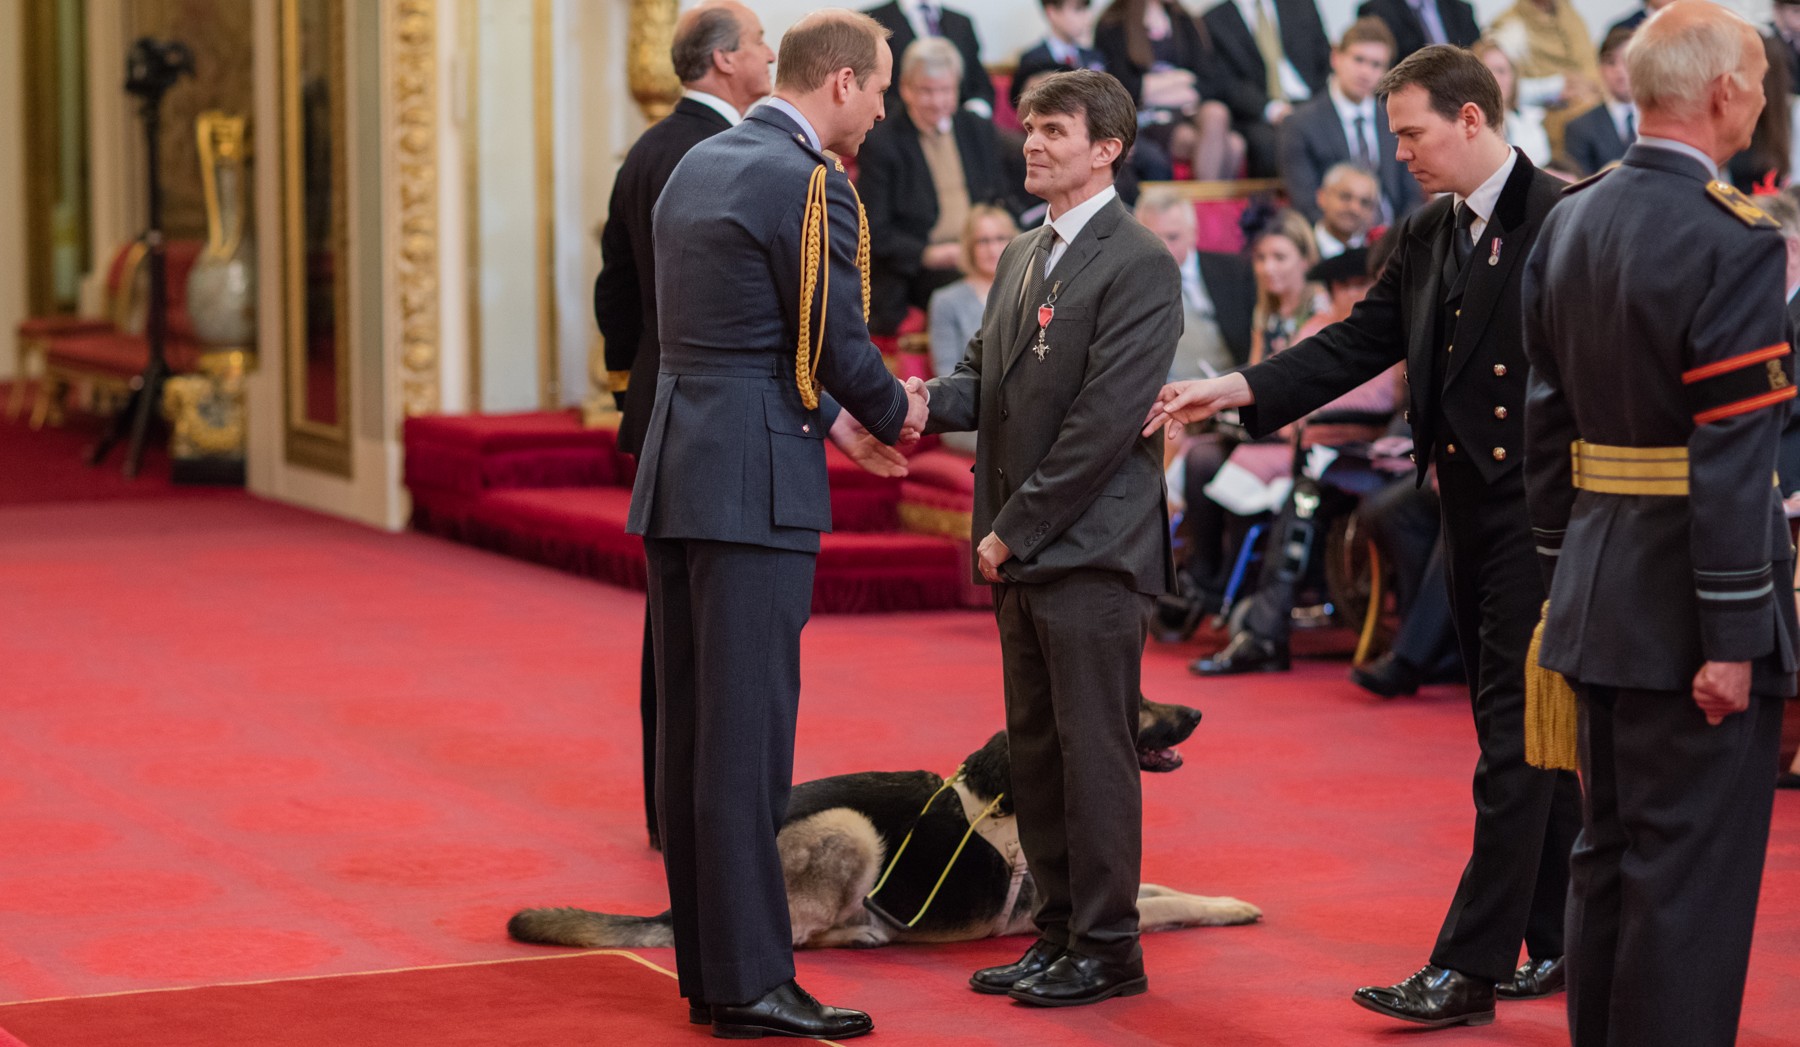 Robin Christopherson receives his MBE from the Duke of Cambridge - all wearing formal clothing standing shaking hands